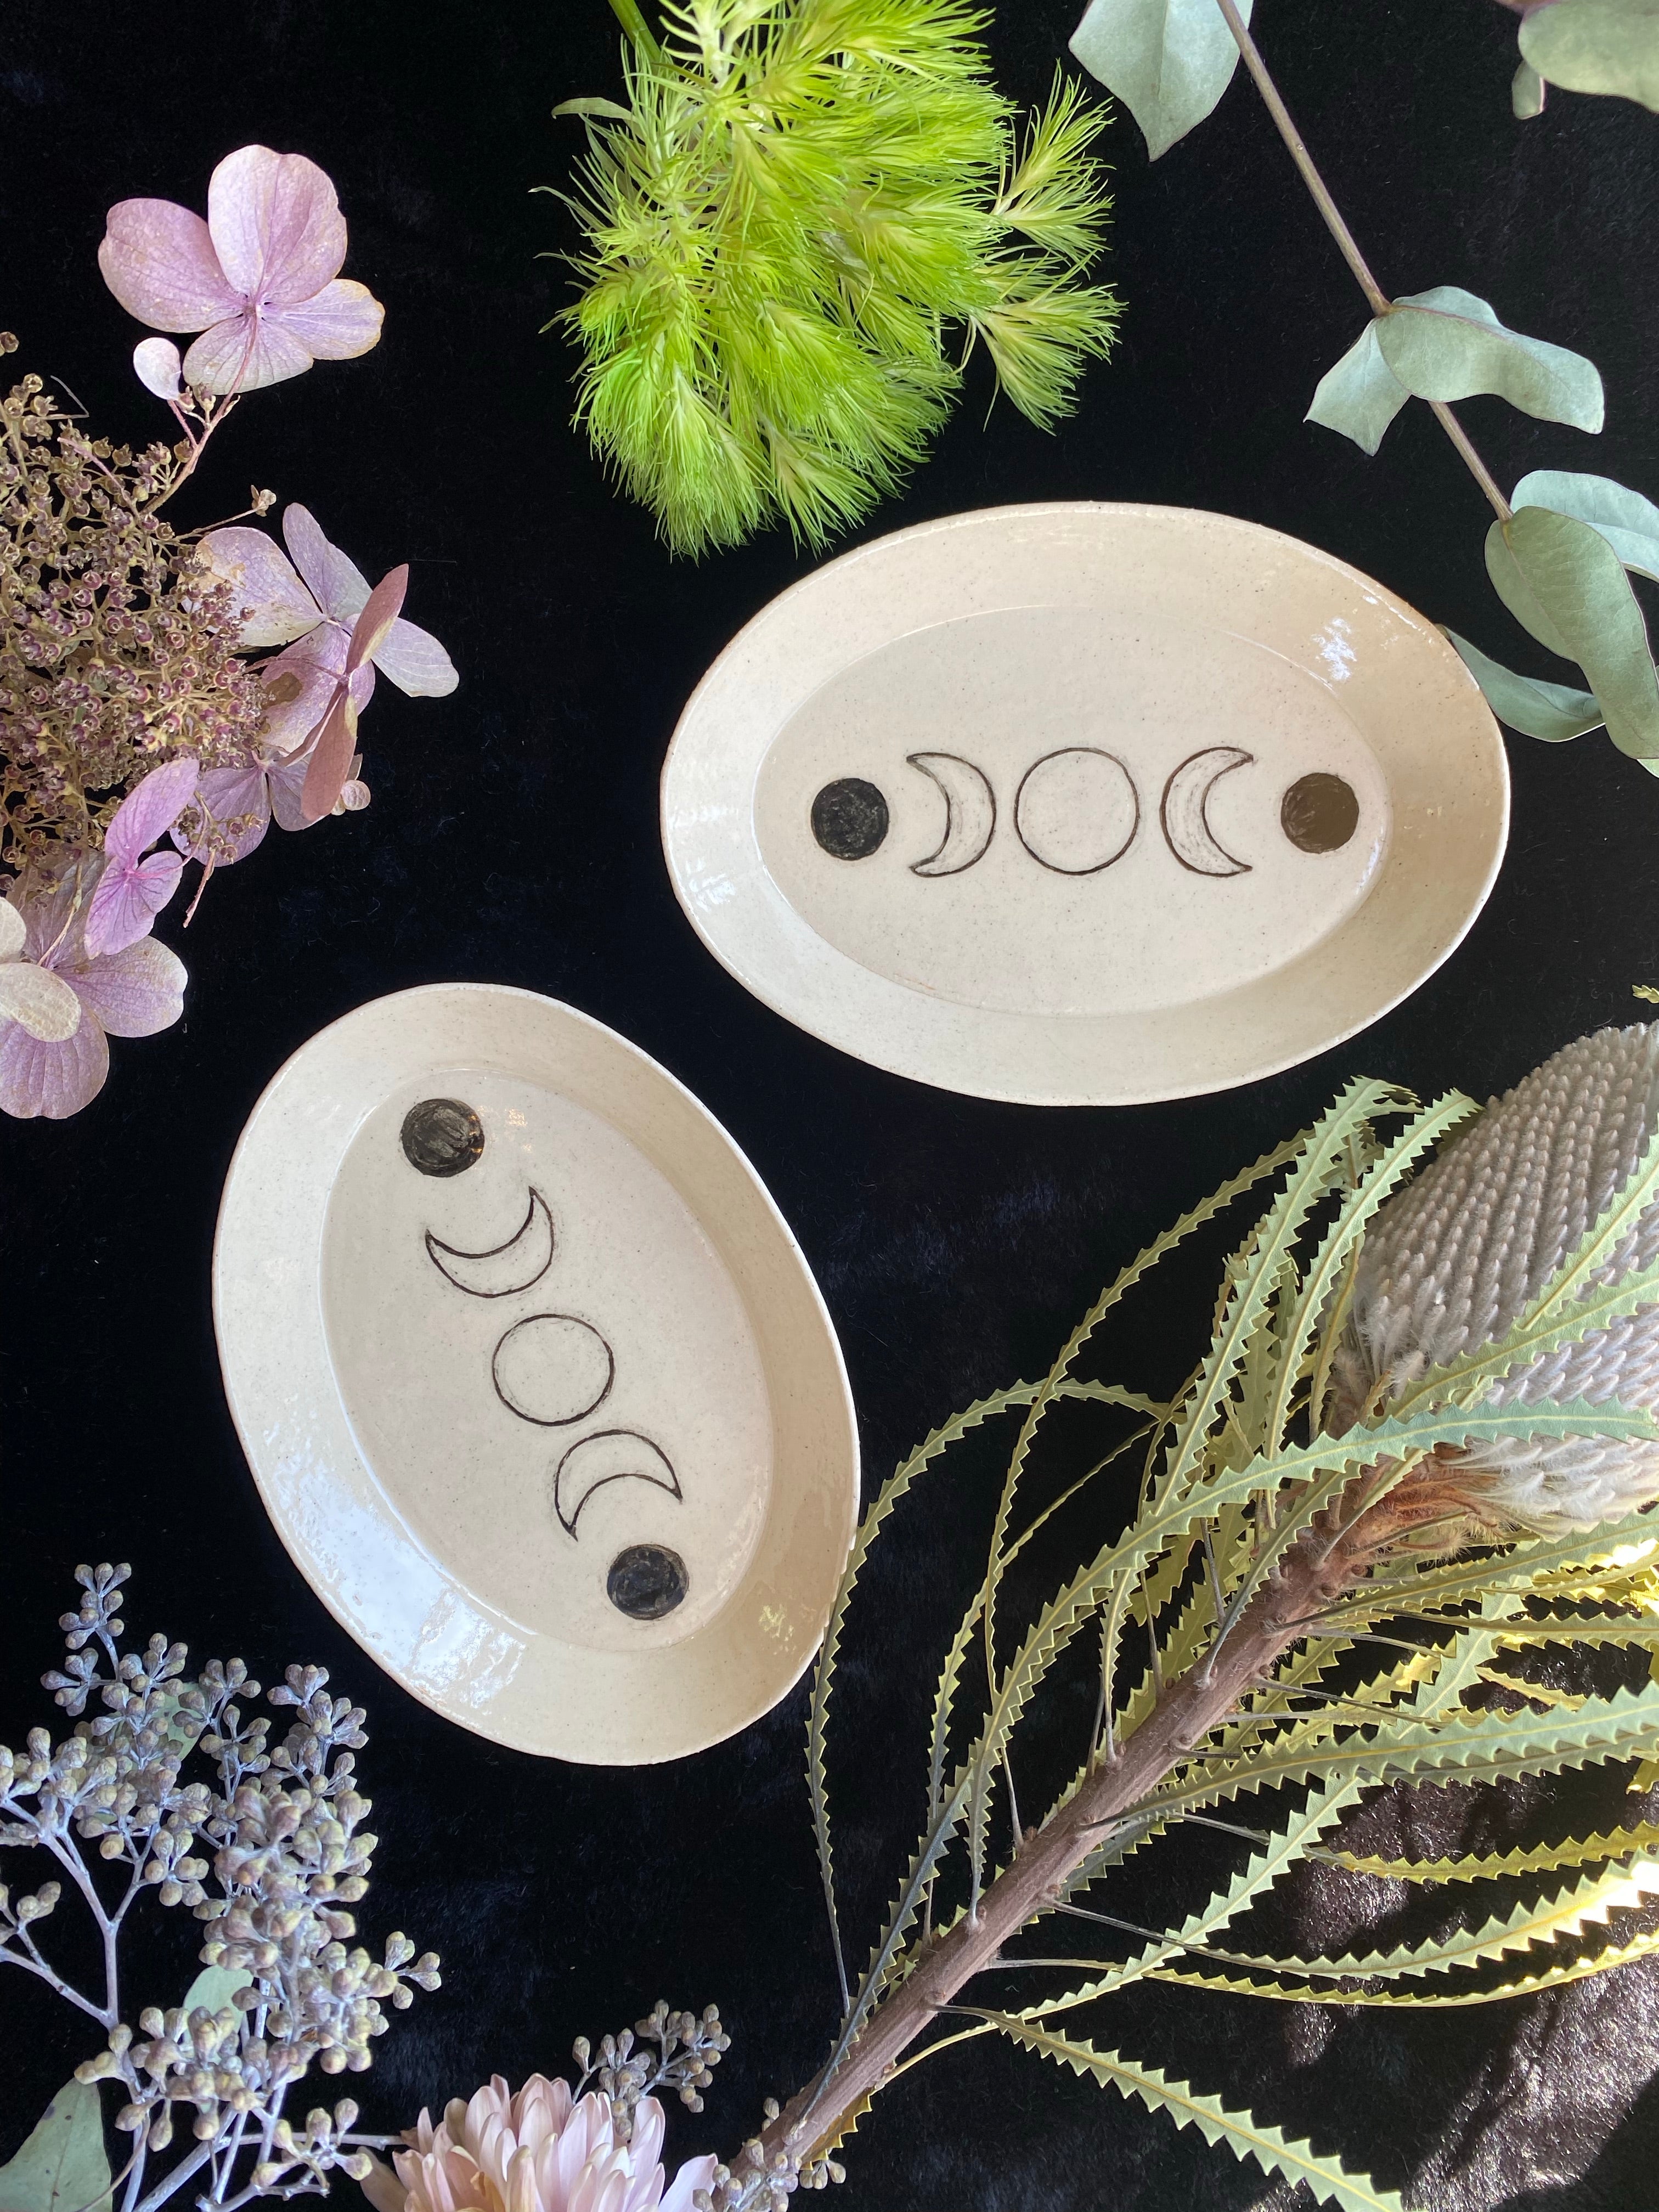 Moon Phase Ceramic Offering Plates and Dinnerware - Keven Craft Rituals